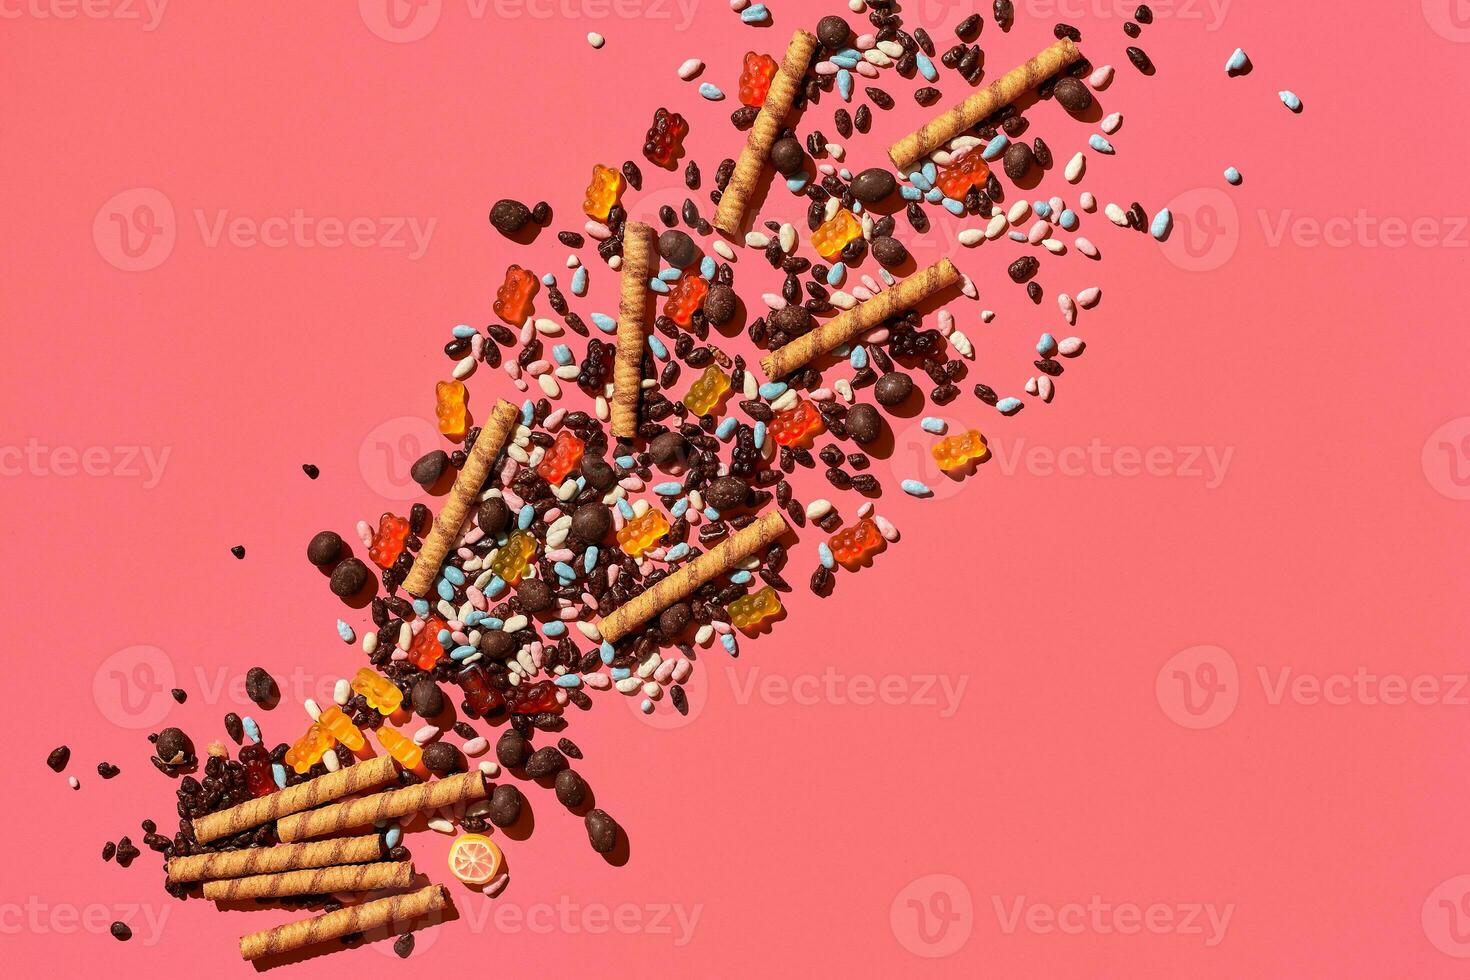 A heap of delicious sweets explode from the corner of image to the top, view from above. From left to the right direction photo